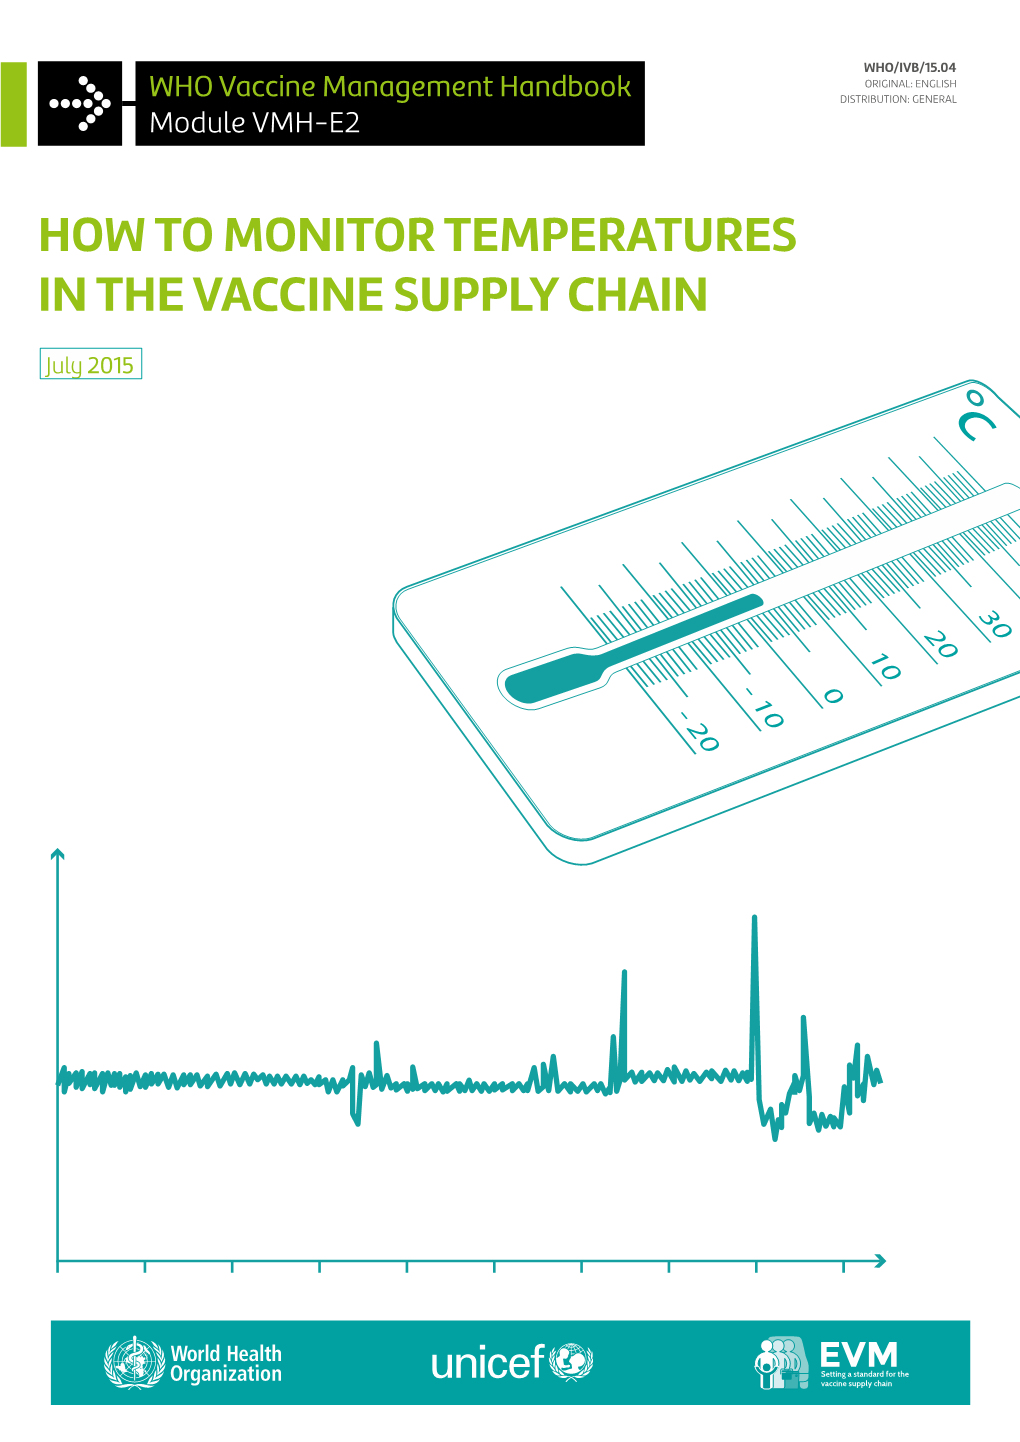 How to Monitor Temperatures in the Vaccine Supply Chain